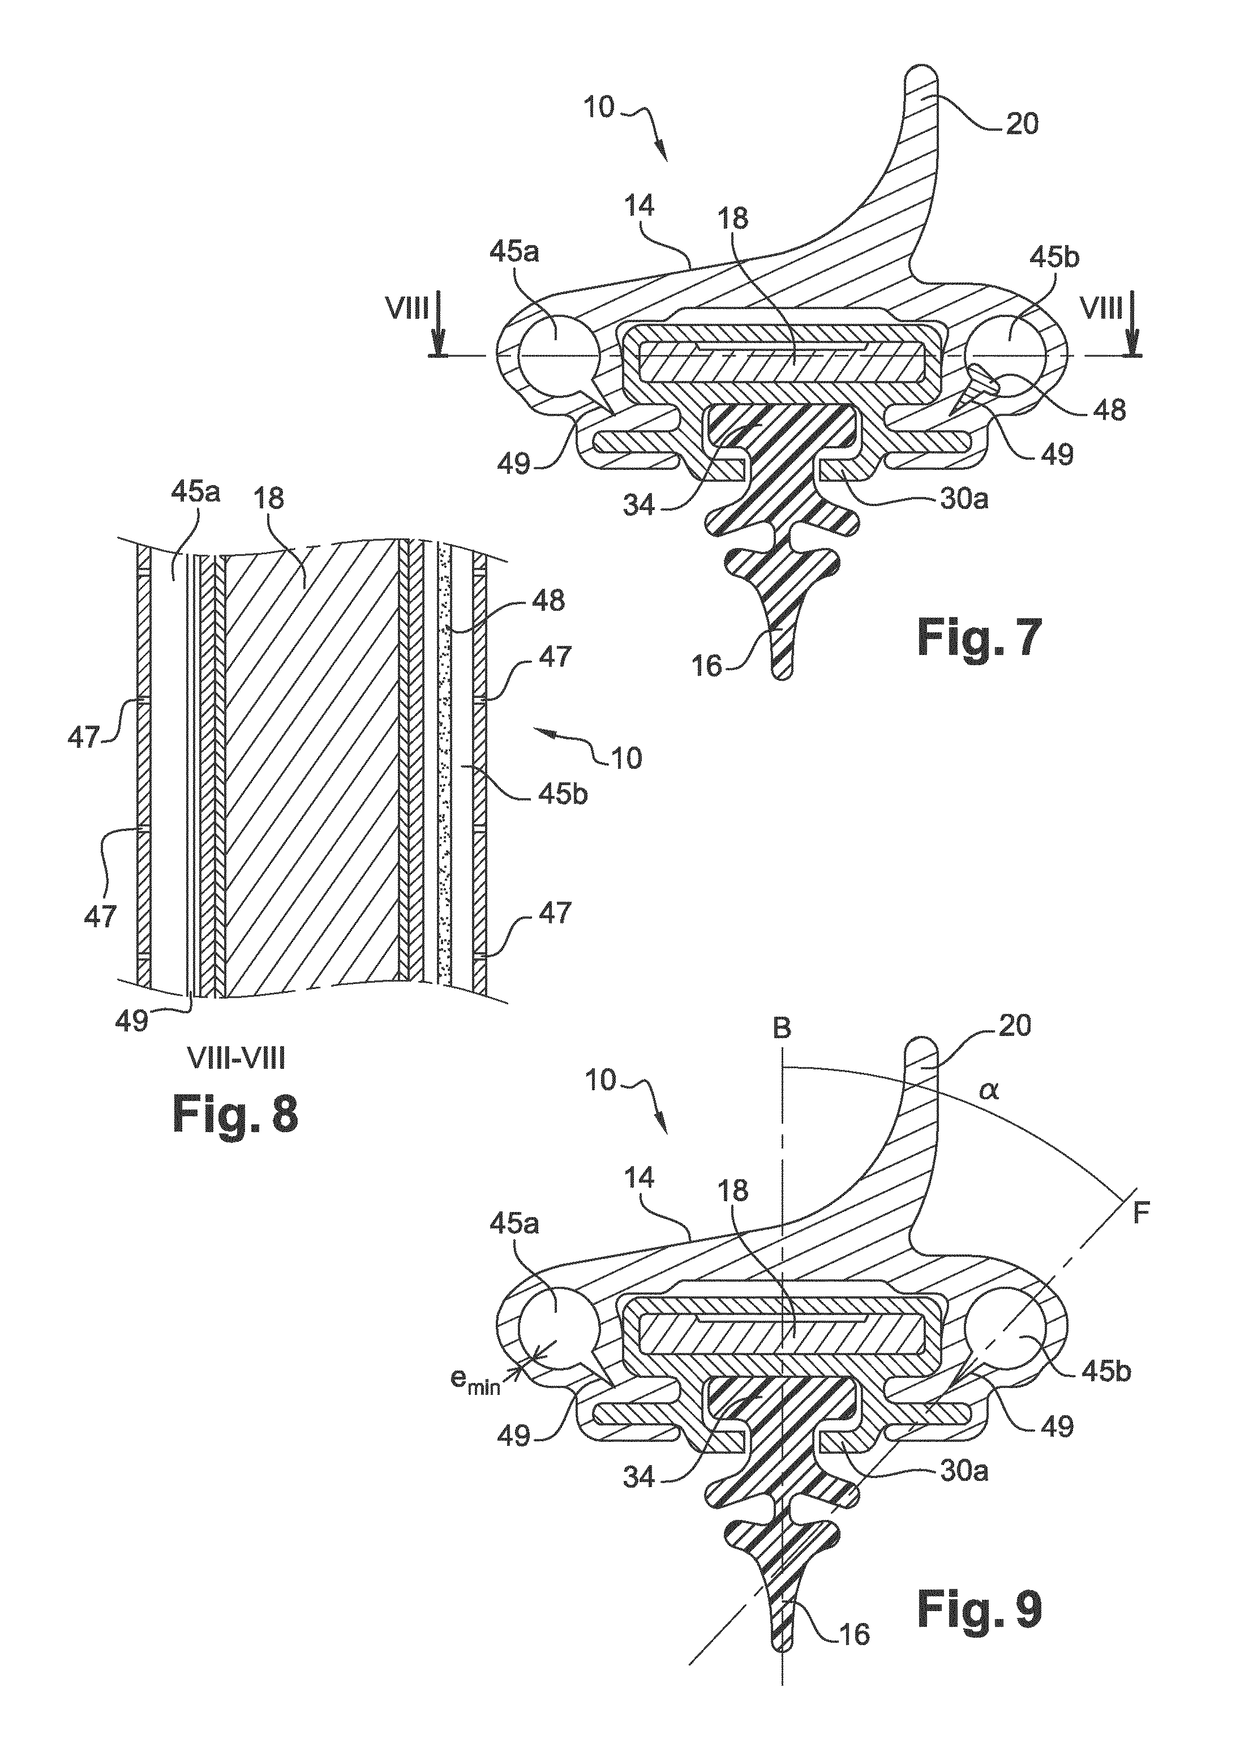 Wiper frame element with at least one channel for distributing windshield wiper fluid